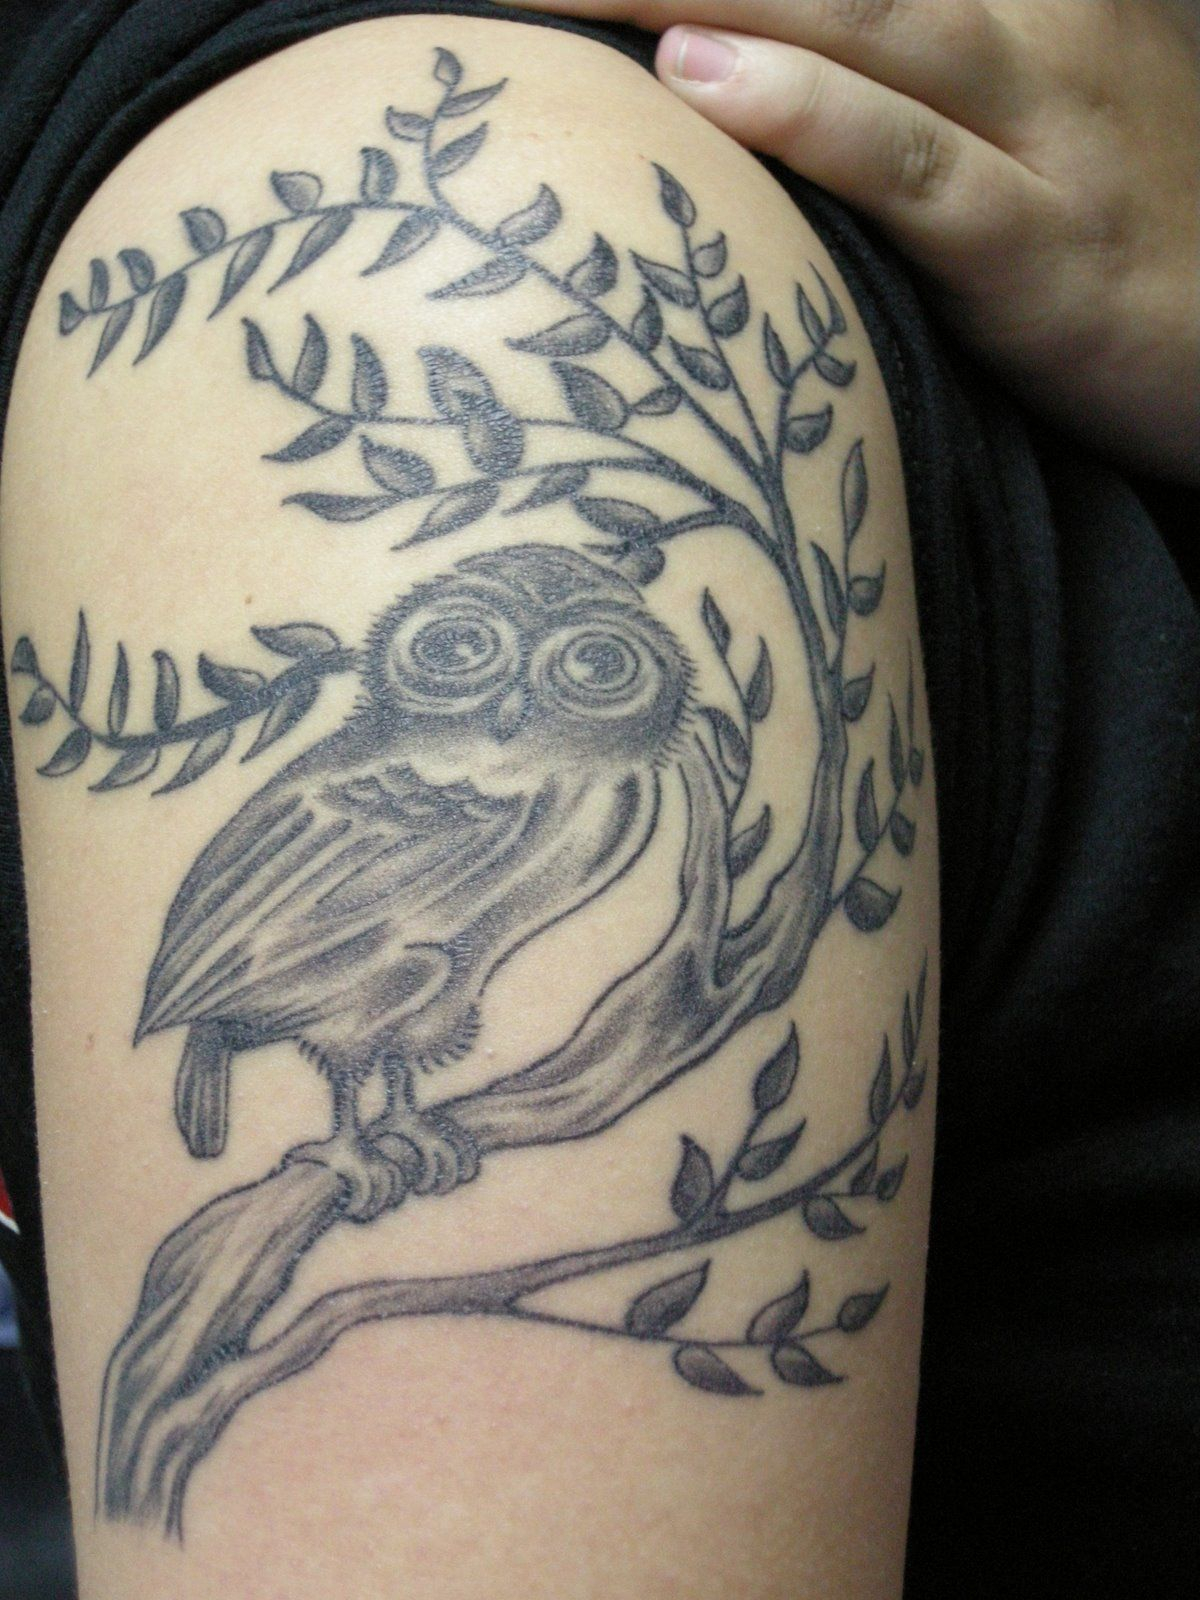 Cool Tattoos For Girls Men Owl Upper Arm Cool Tattoo Design within size 1200 X 1600